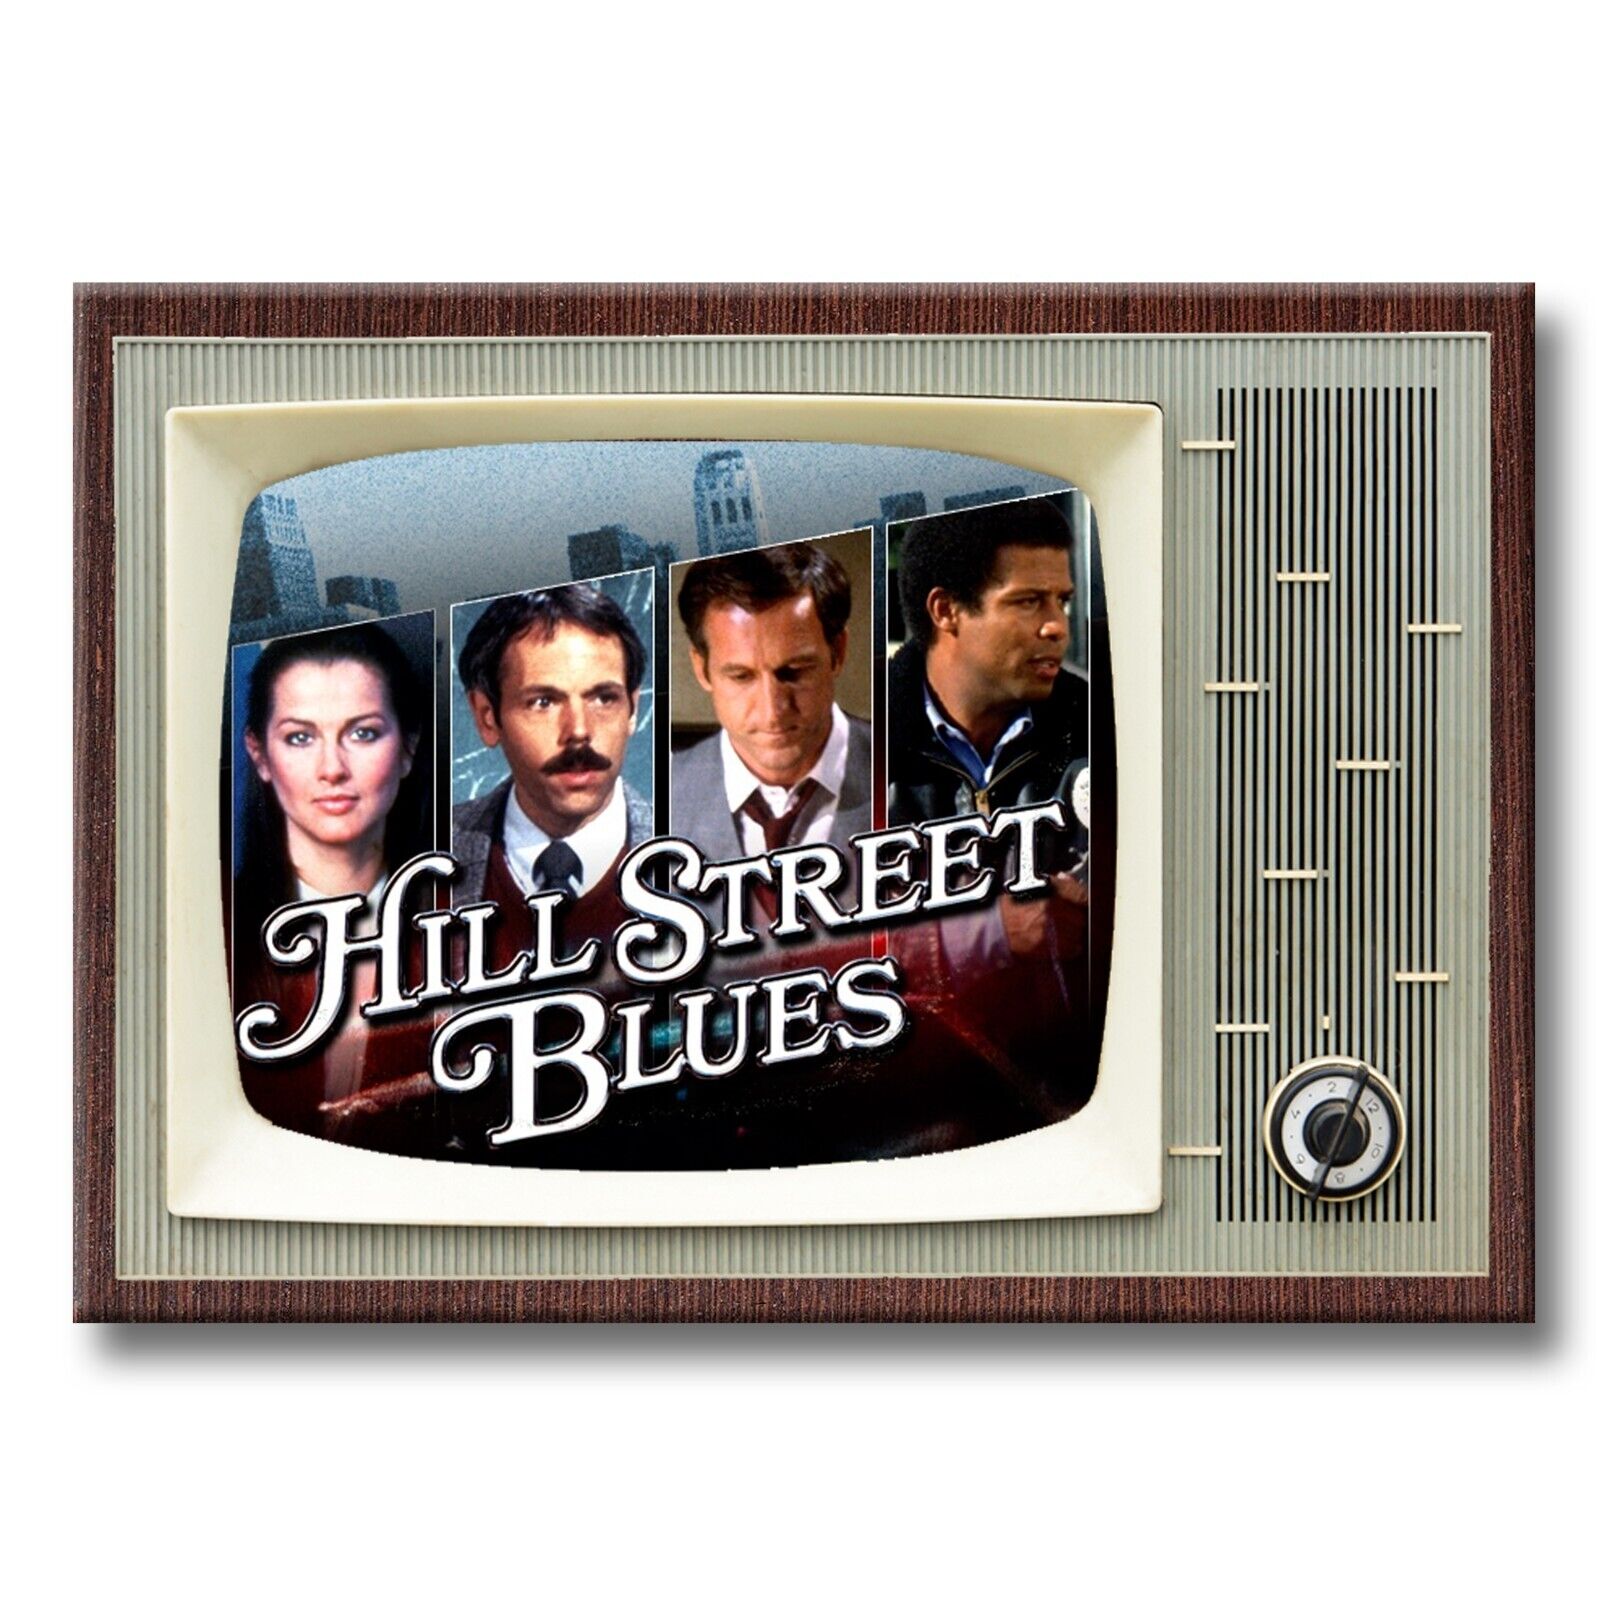 Hill Street Blues TV Show Retro TV 3.5 inches x 2.5 inches Steel Fridge Magnet